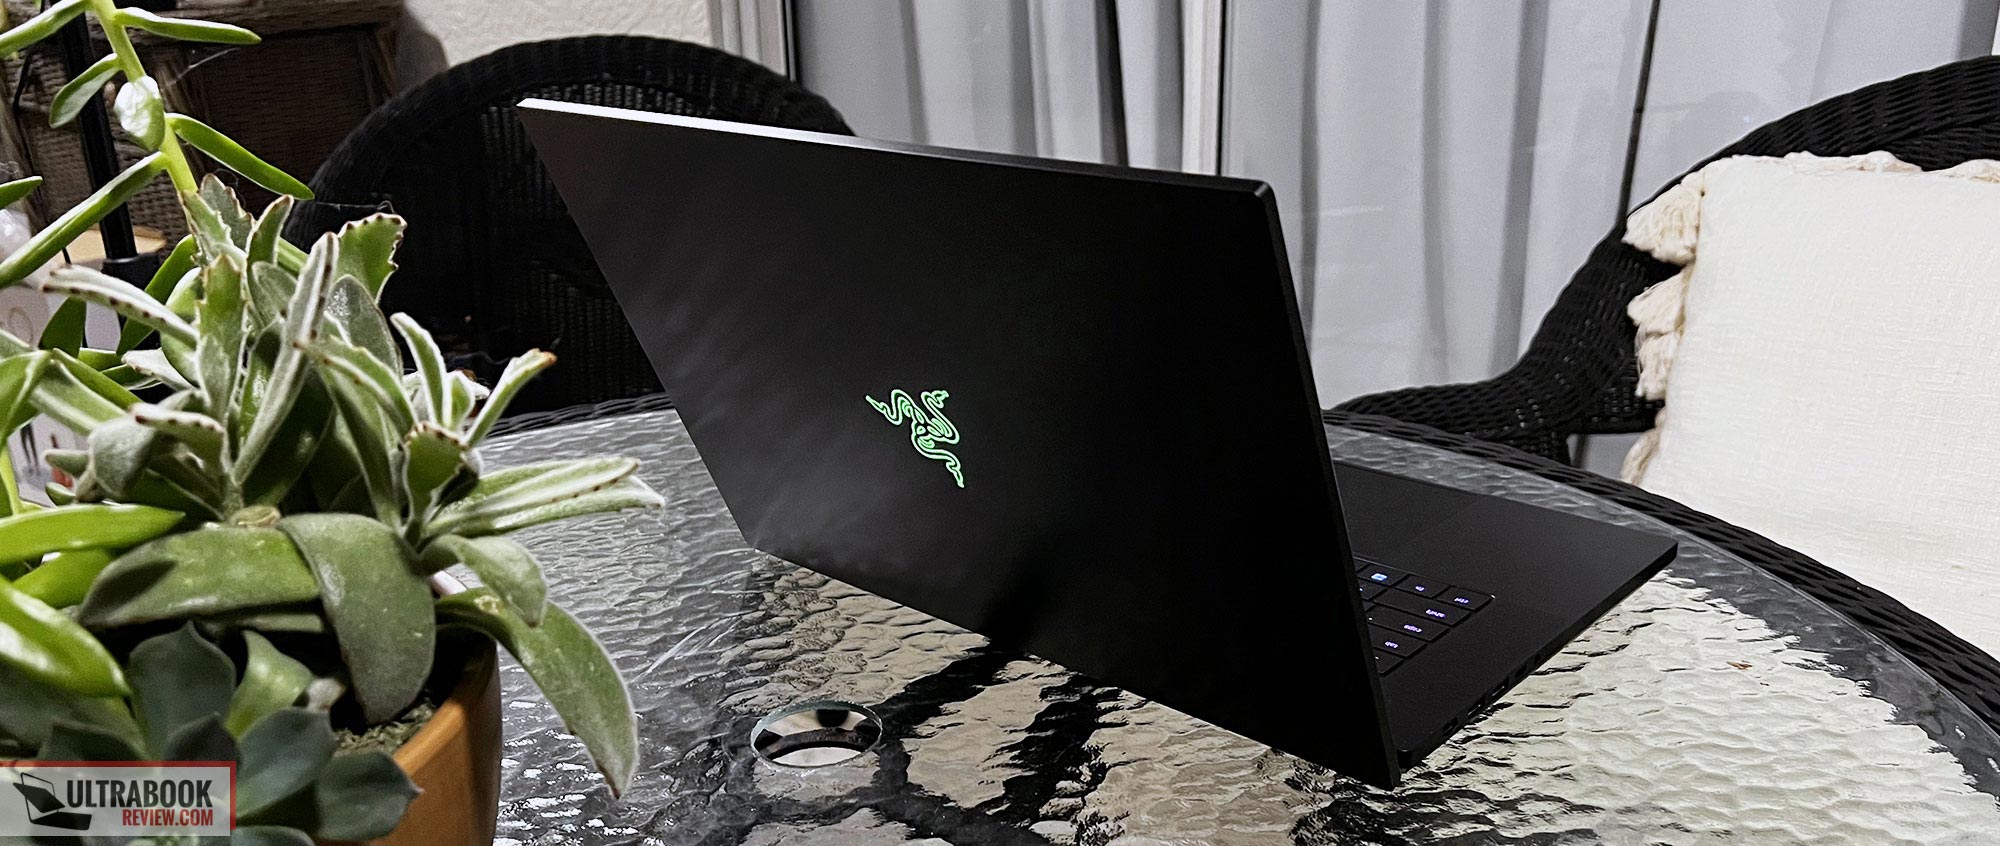 Razer Blade 16 Review: Premium, Powerful, But Not Without Fault 